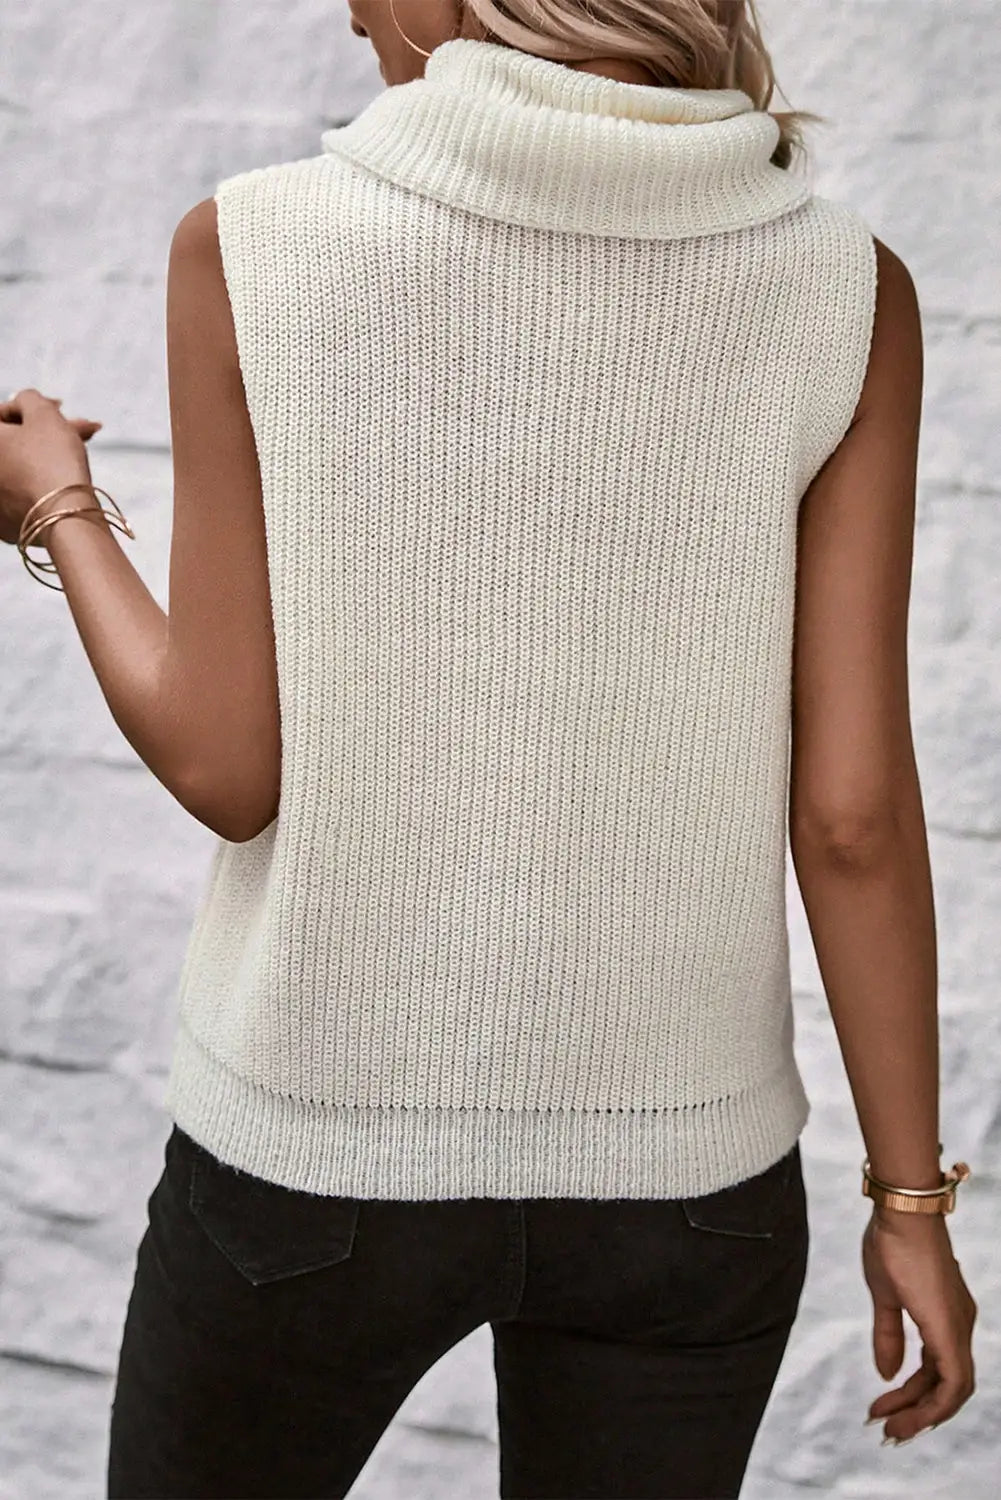 White central seam cowl neck sweater vest - sweaters & cardigans